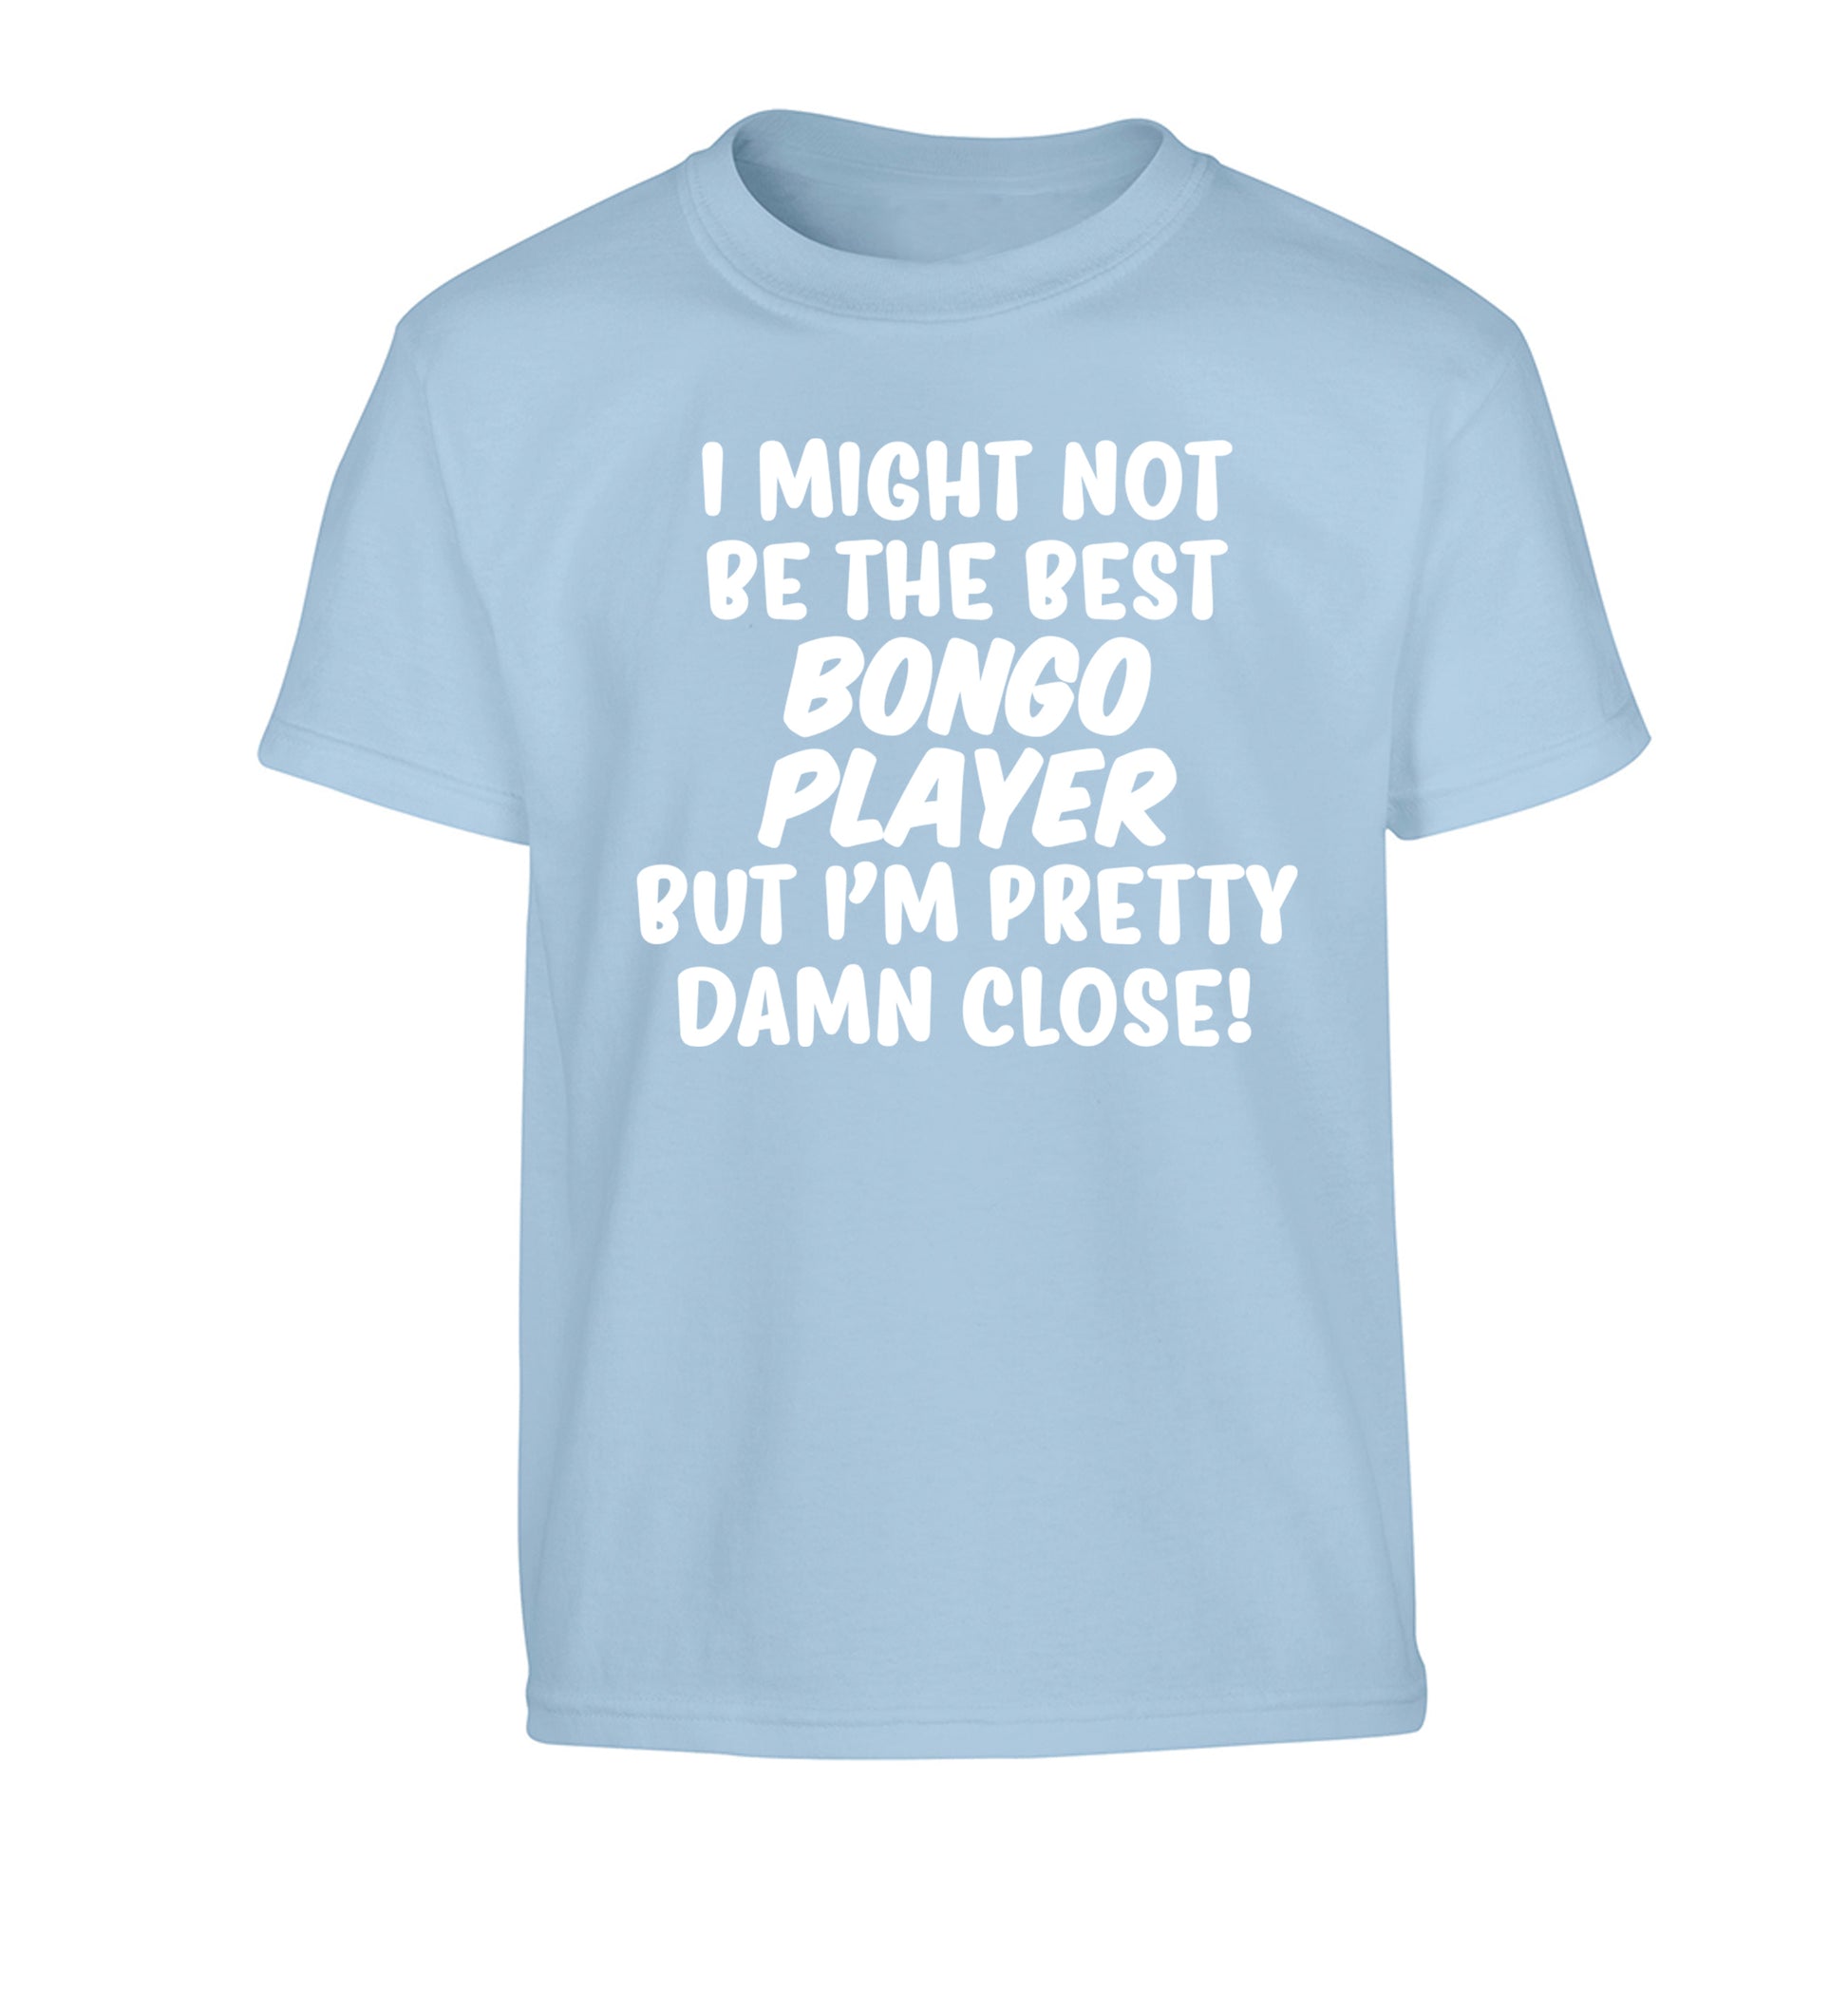 I might not be the best bongo player but I'm pretty close! Children's light blue Tshirt 12-14 Years